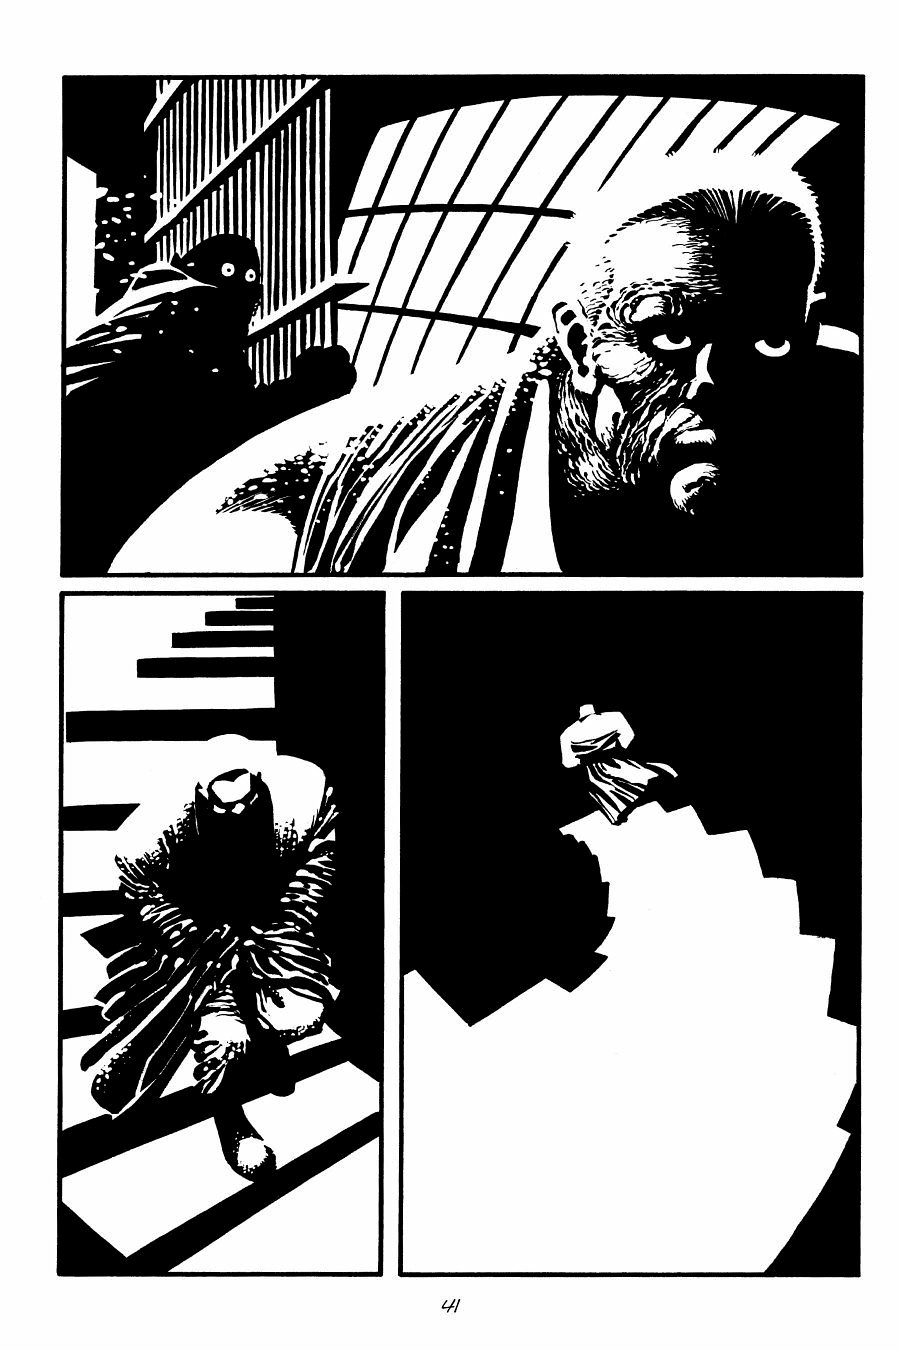 page 41 of sin city 6 booze broads and bullets